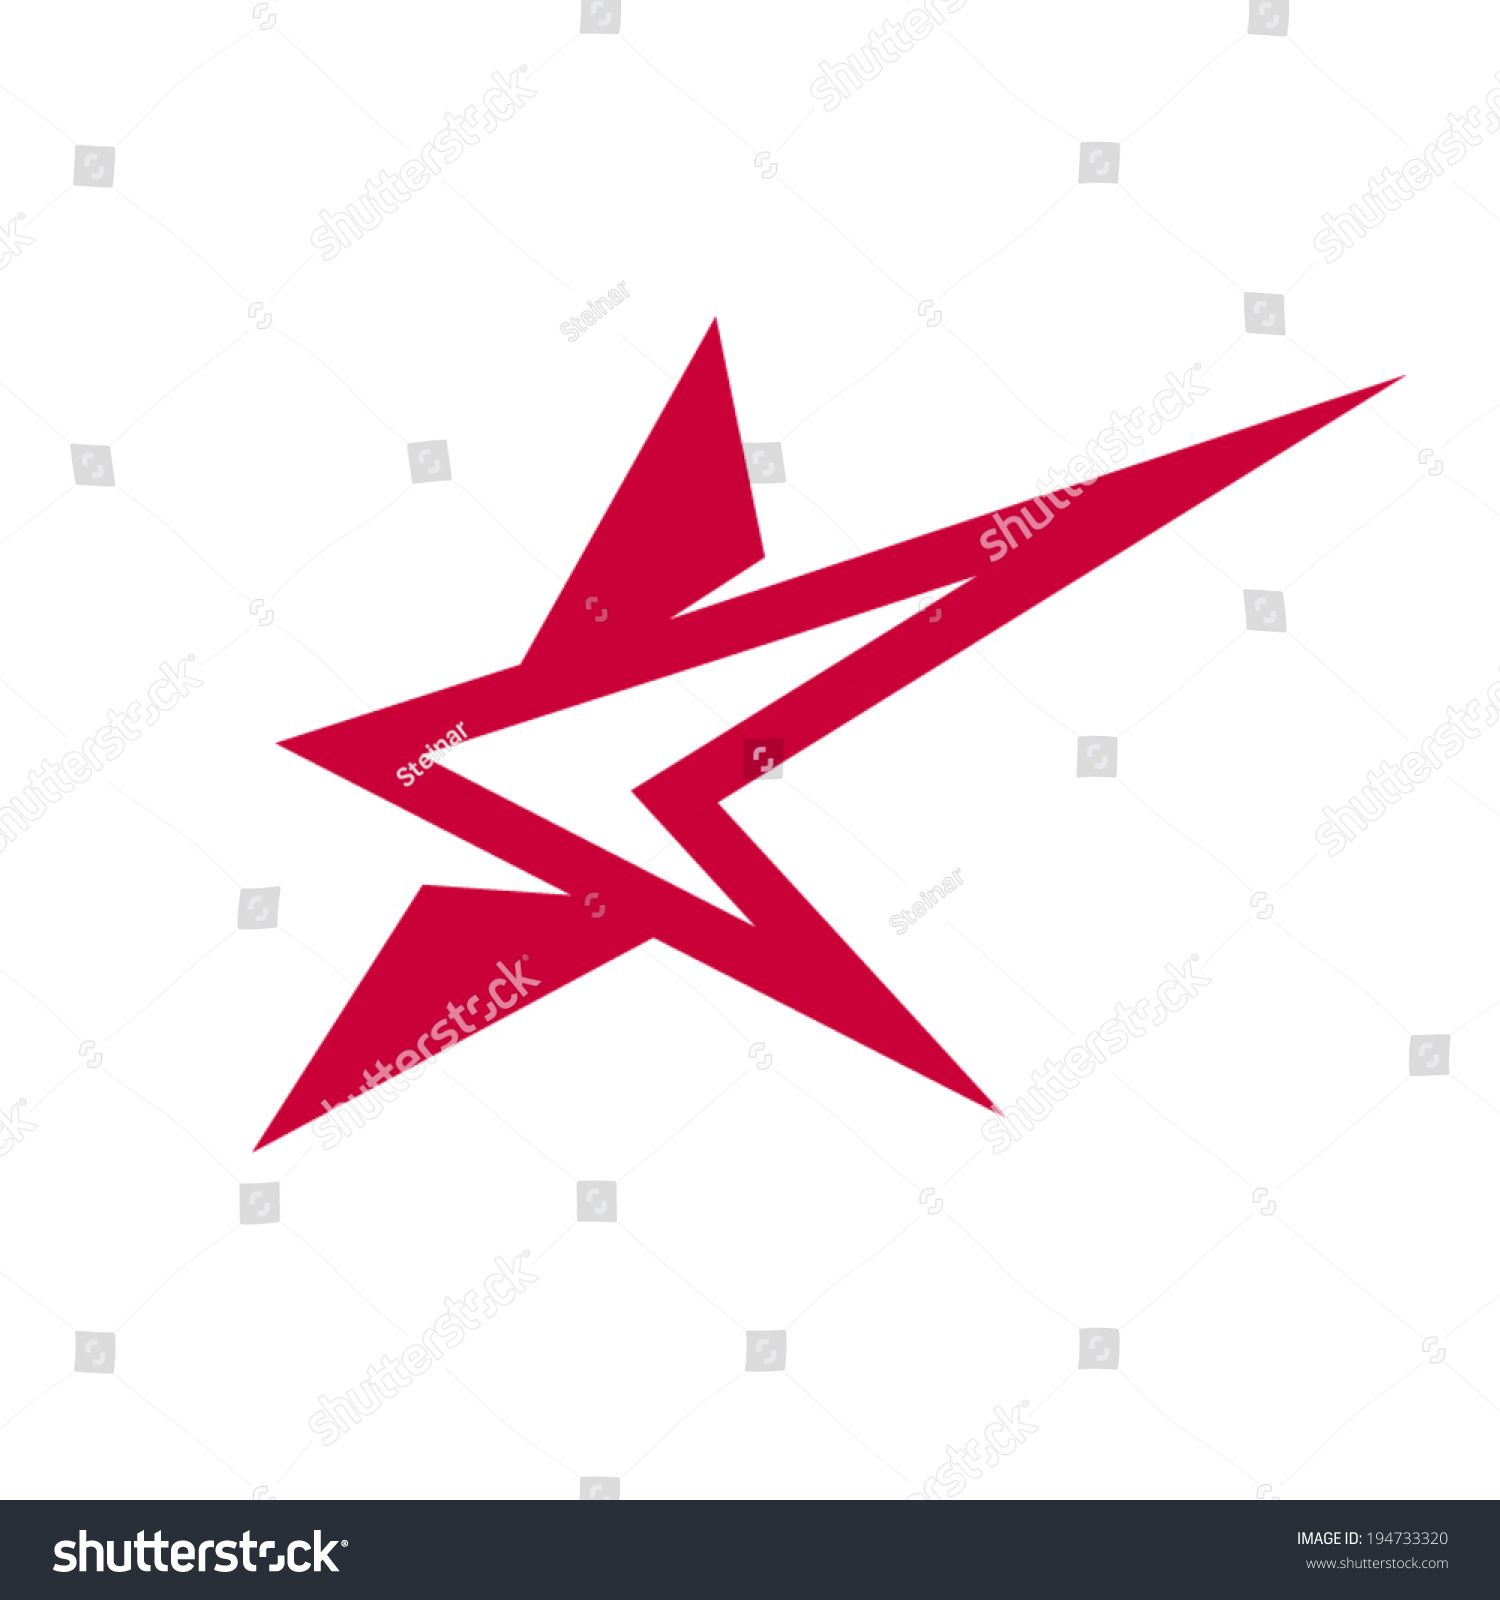 Abstract Star Sign Branding Identity Corporate Stock Vector ...